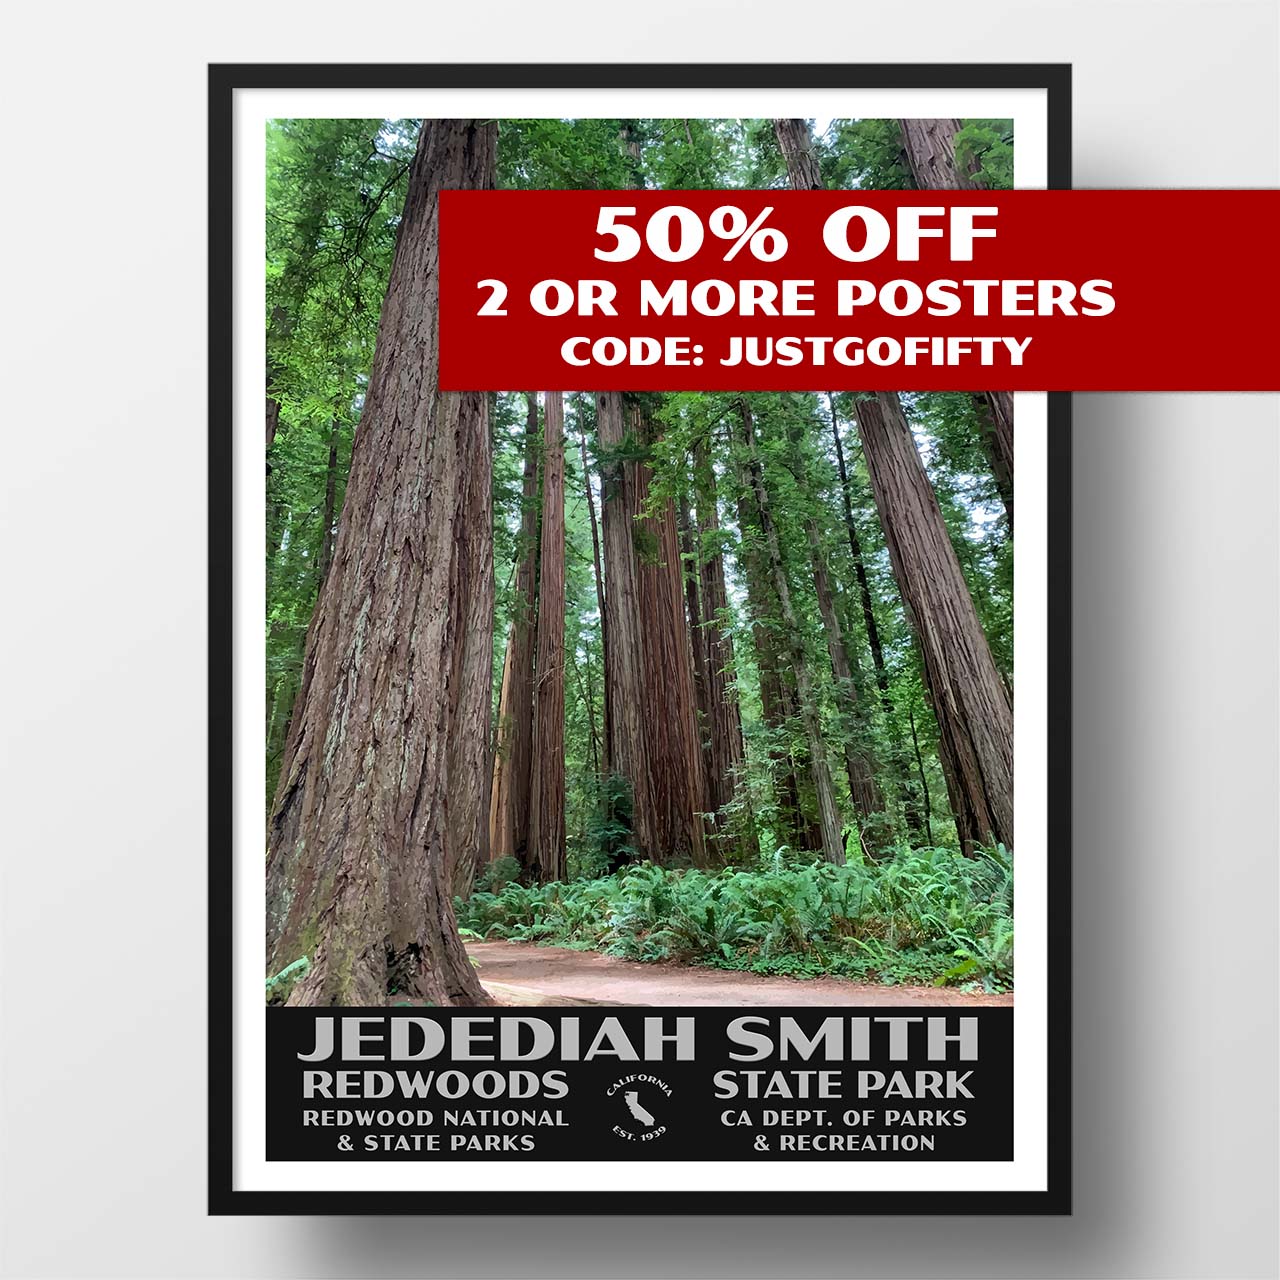 Jedediah smith redwoods state park poster